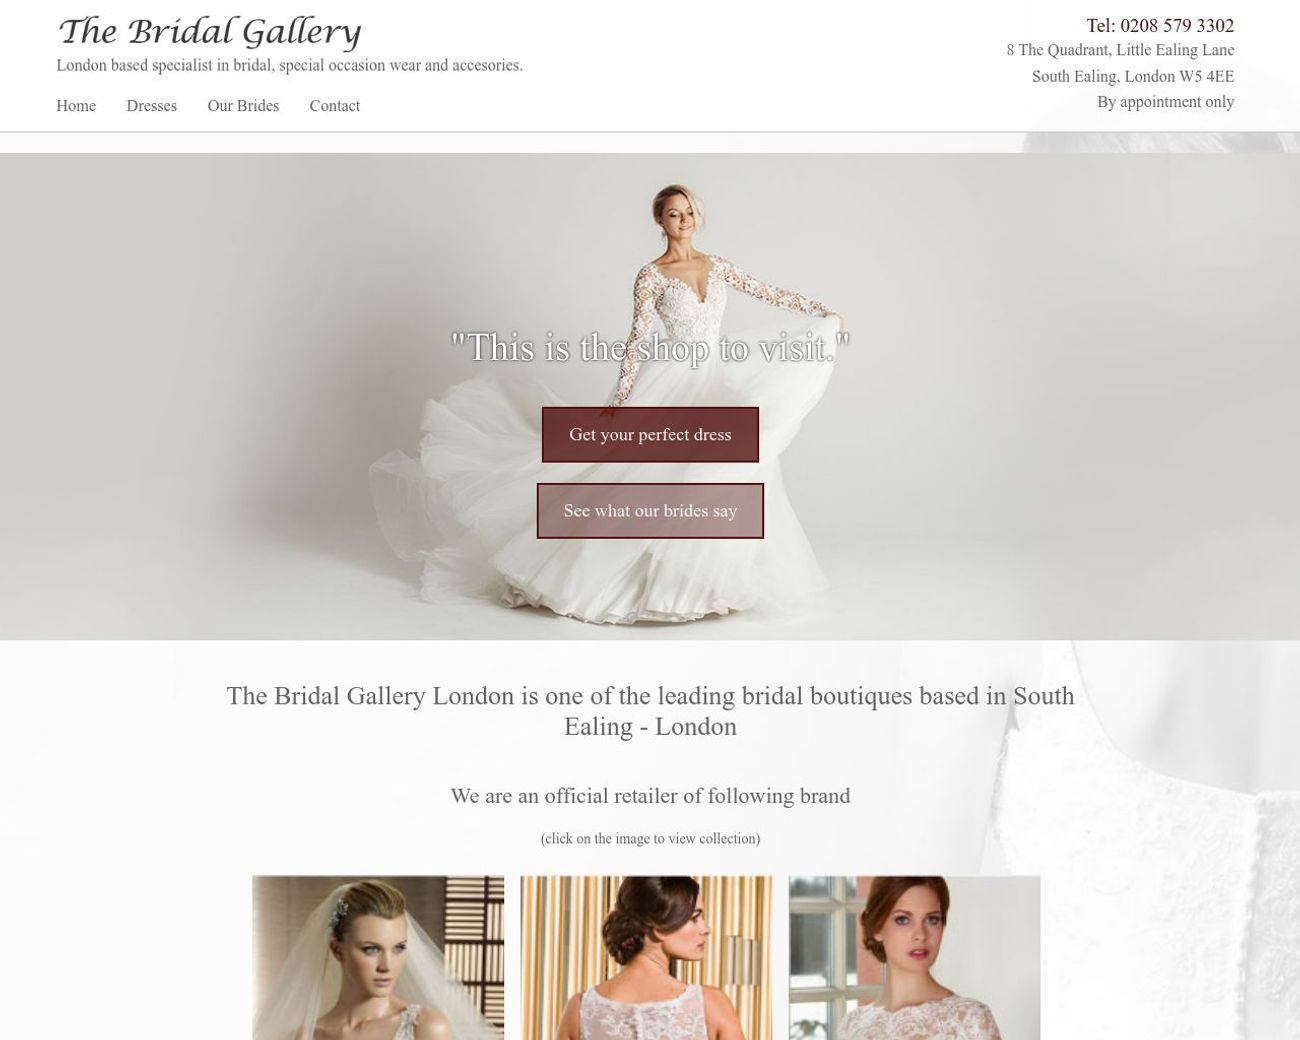 The Bridal Gallery London